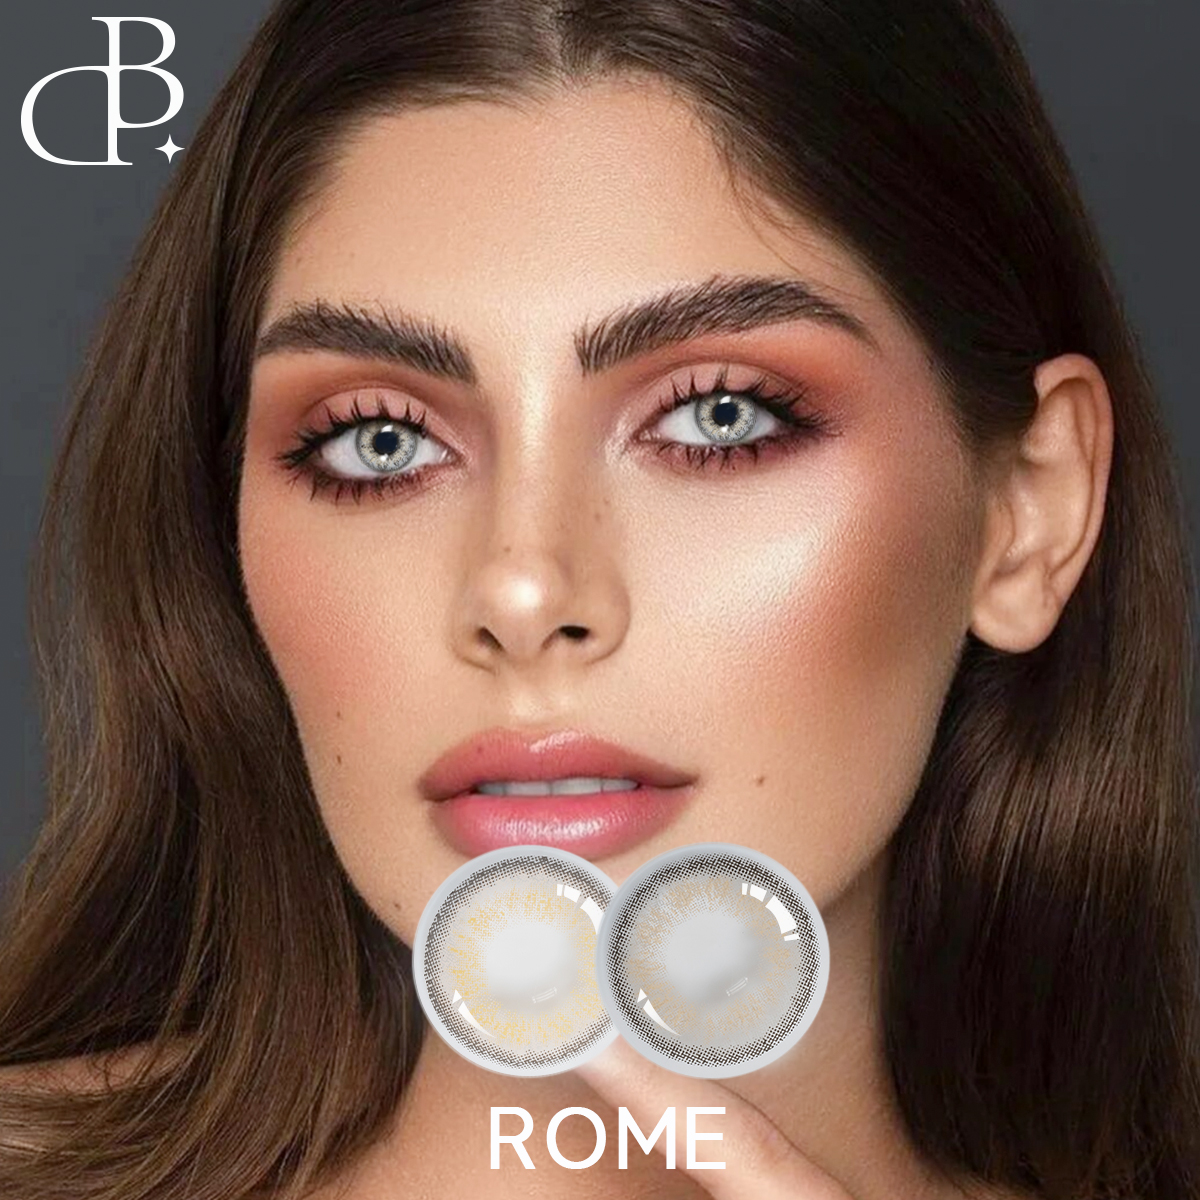 2024 ROME Brown European women beauty colored eye contact lens contact lenses malinis na kahon portable manual rotary lens delivery